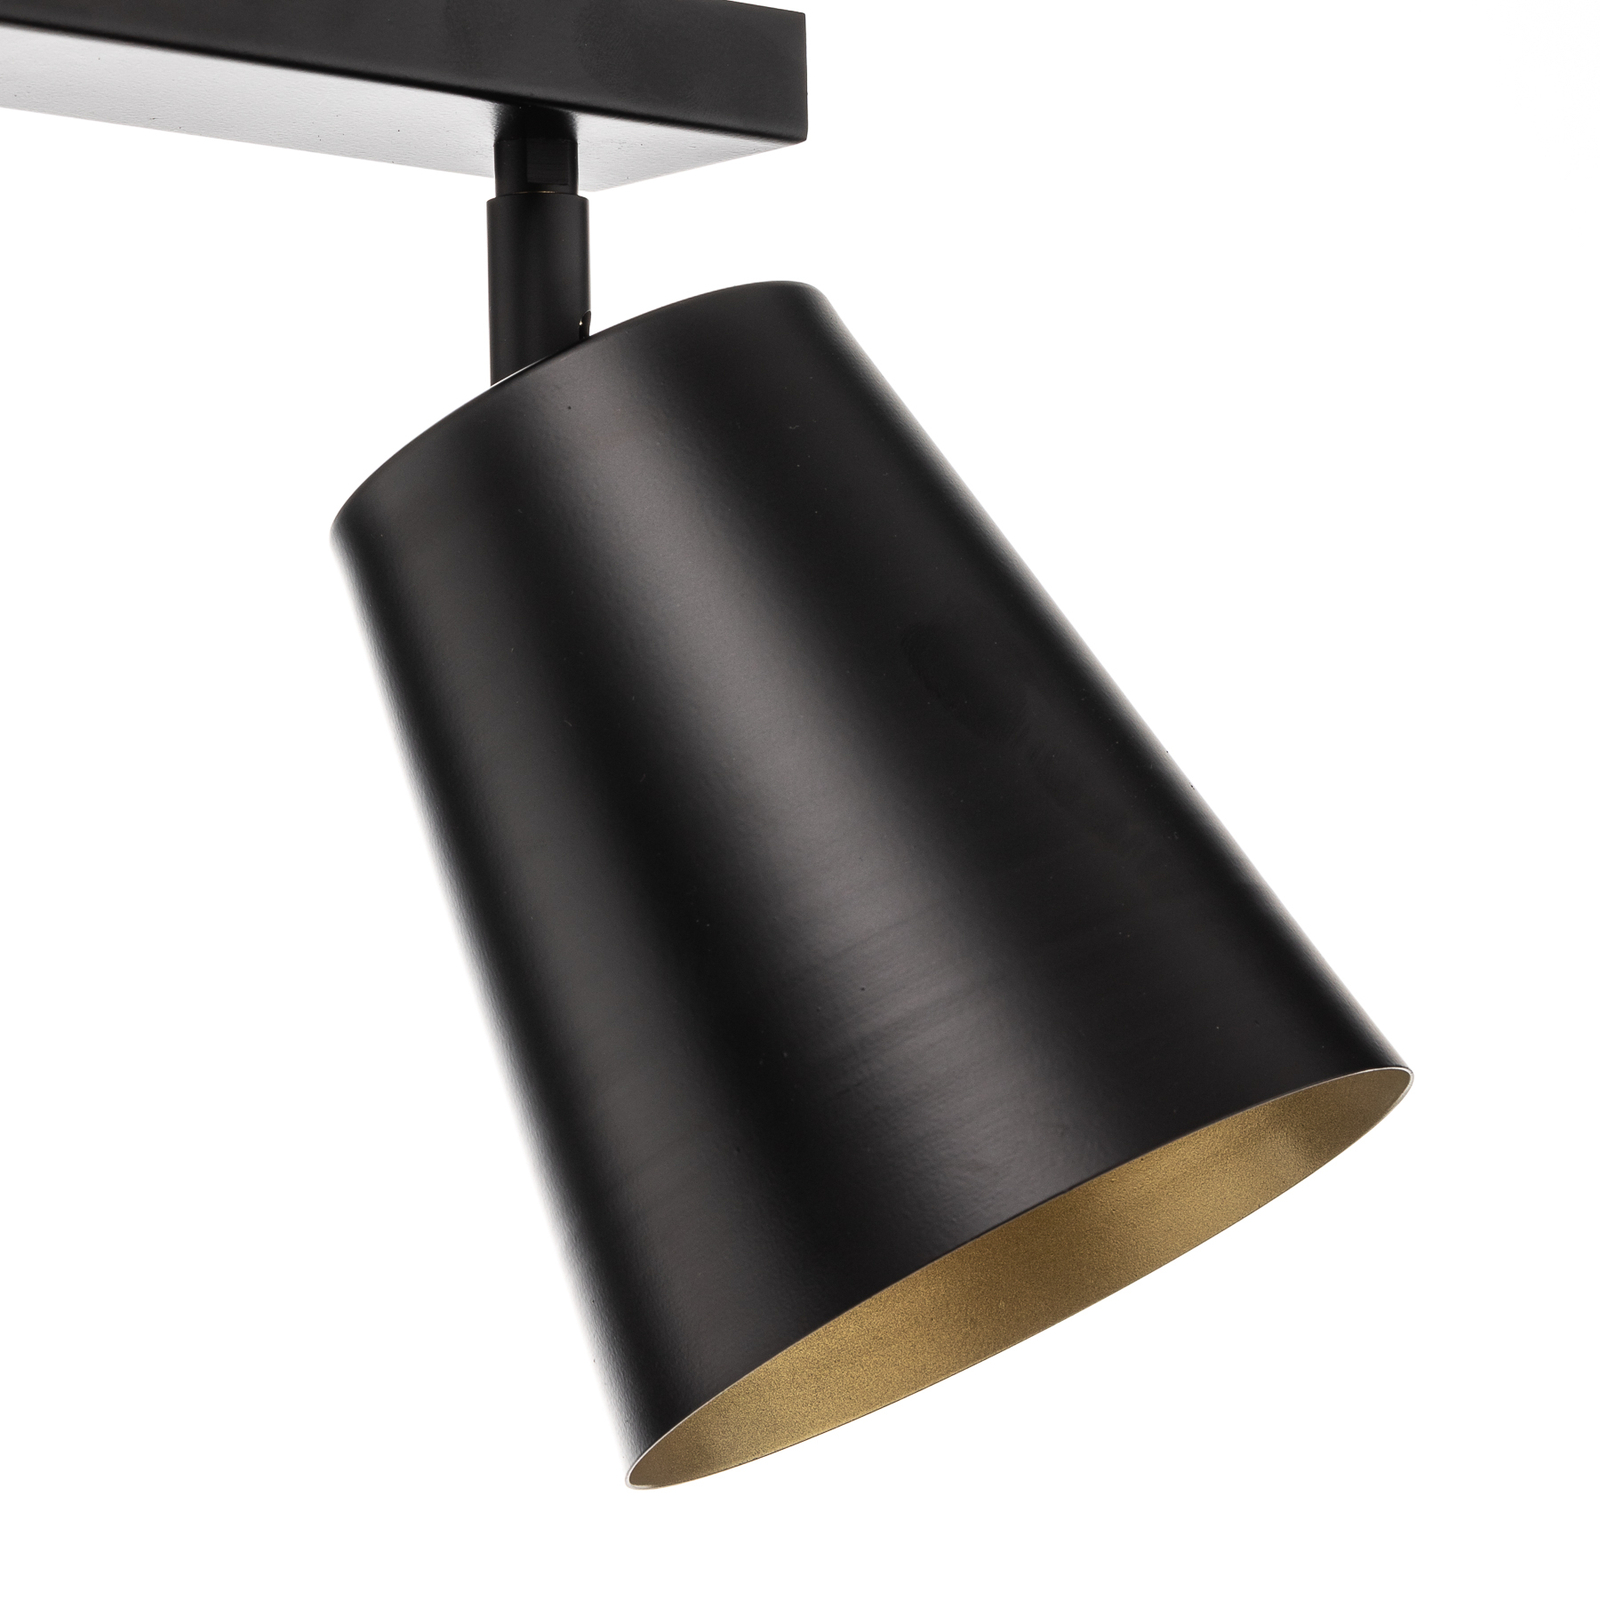 Prism downlight, two-bulb, black/gold